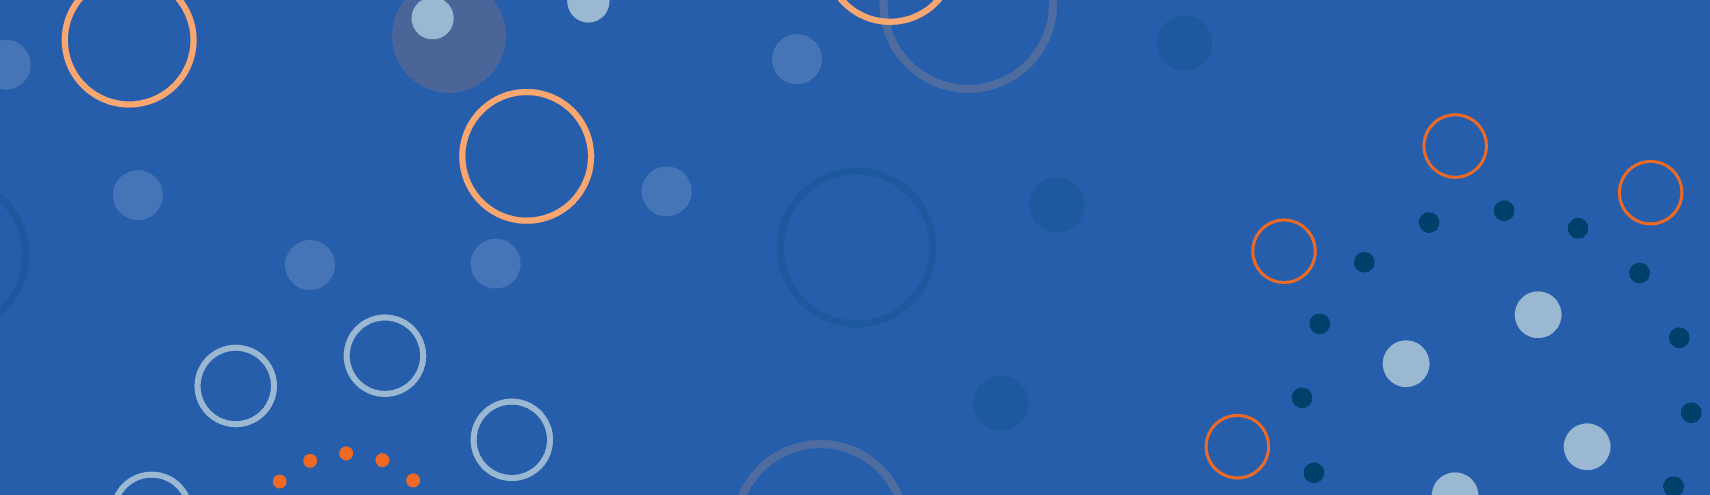 Blue background with dark and light orange circles decorations.